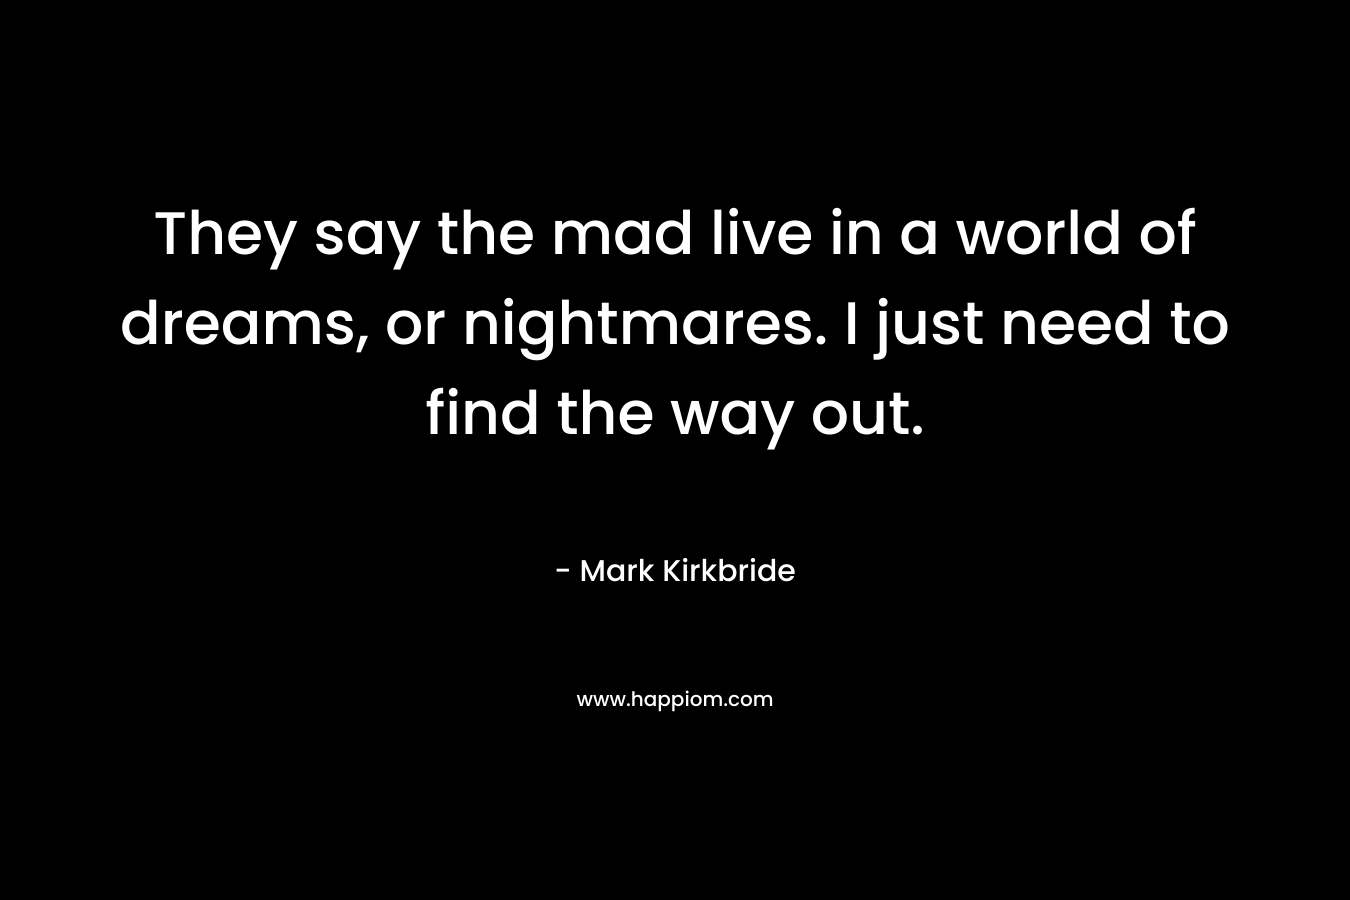 They say the mad live in a world of dreams, or nightmares. I just need to find the way out. – Mark Kirkbride